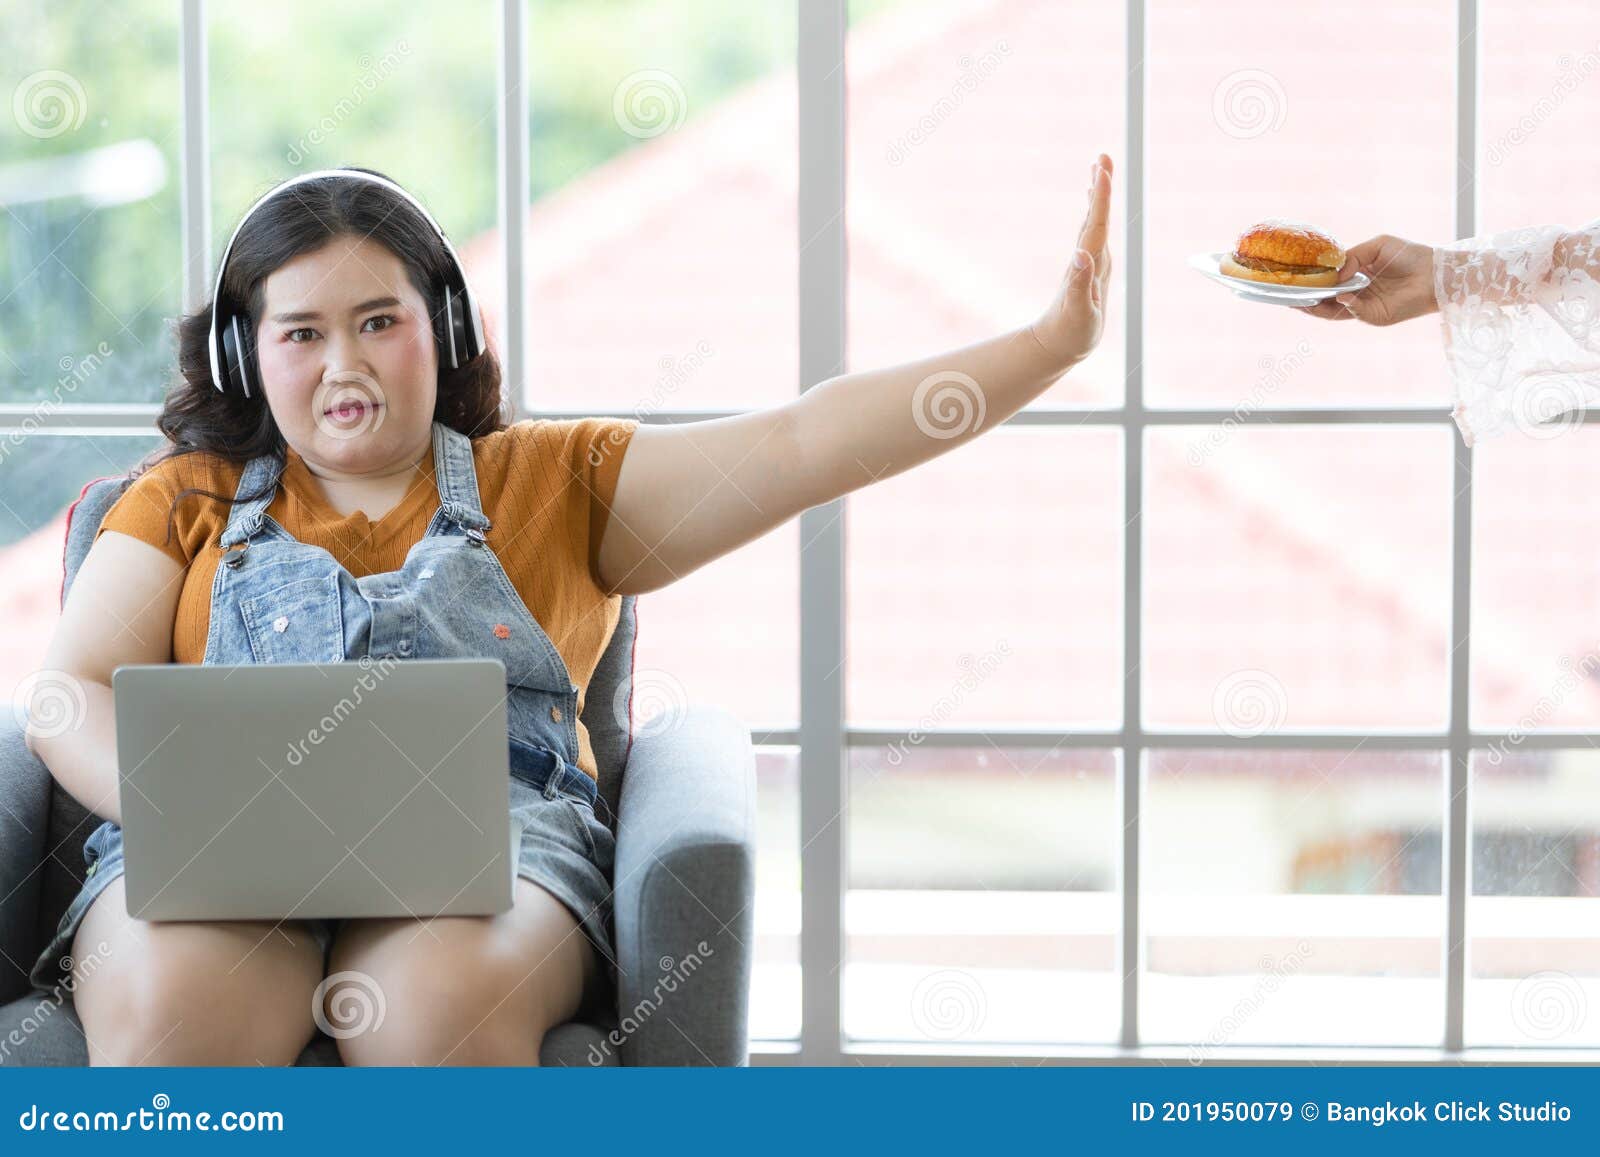 chubby girl with headphones on couch